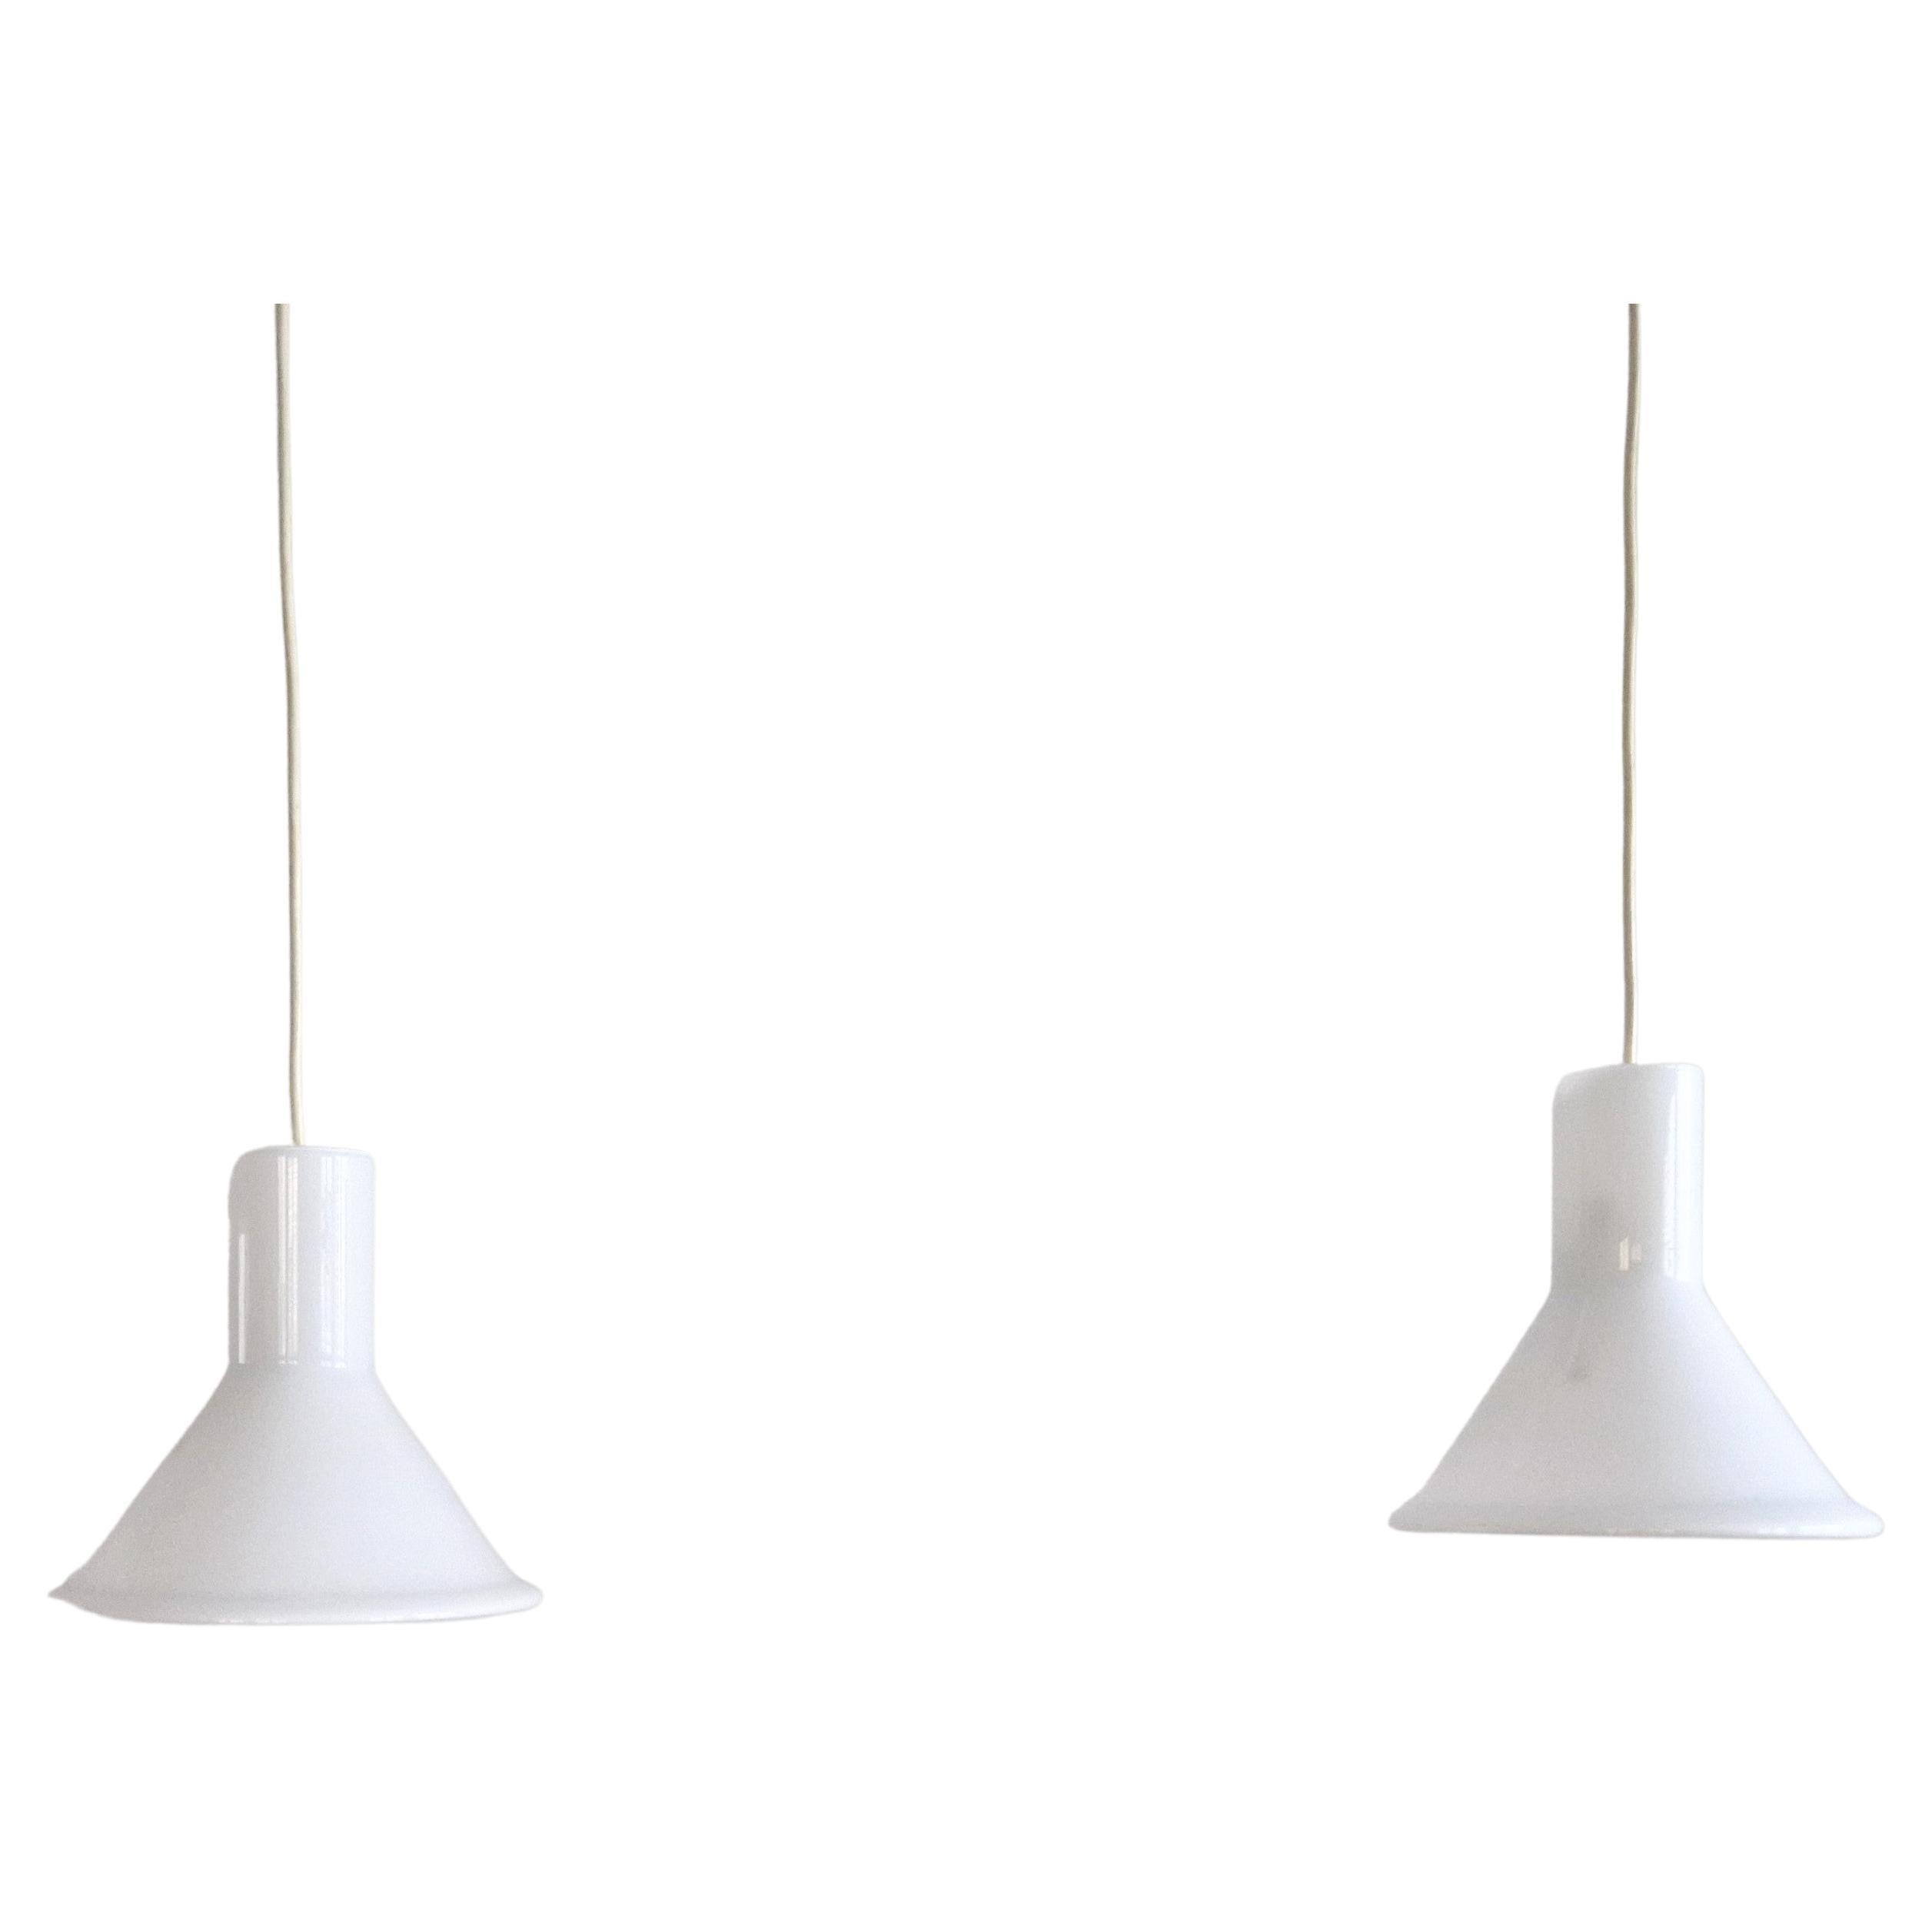 Set of 2 White Mini P&T Pendant Lamps by Michael Bang for Holmegaard